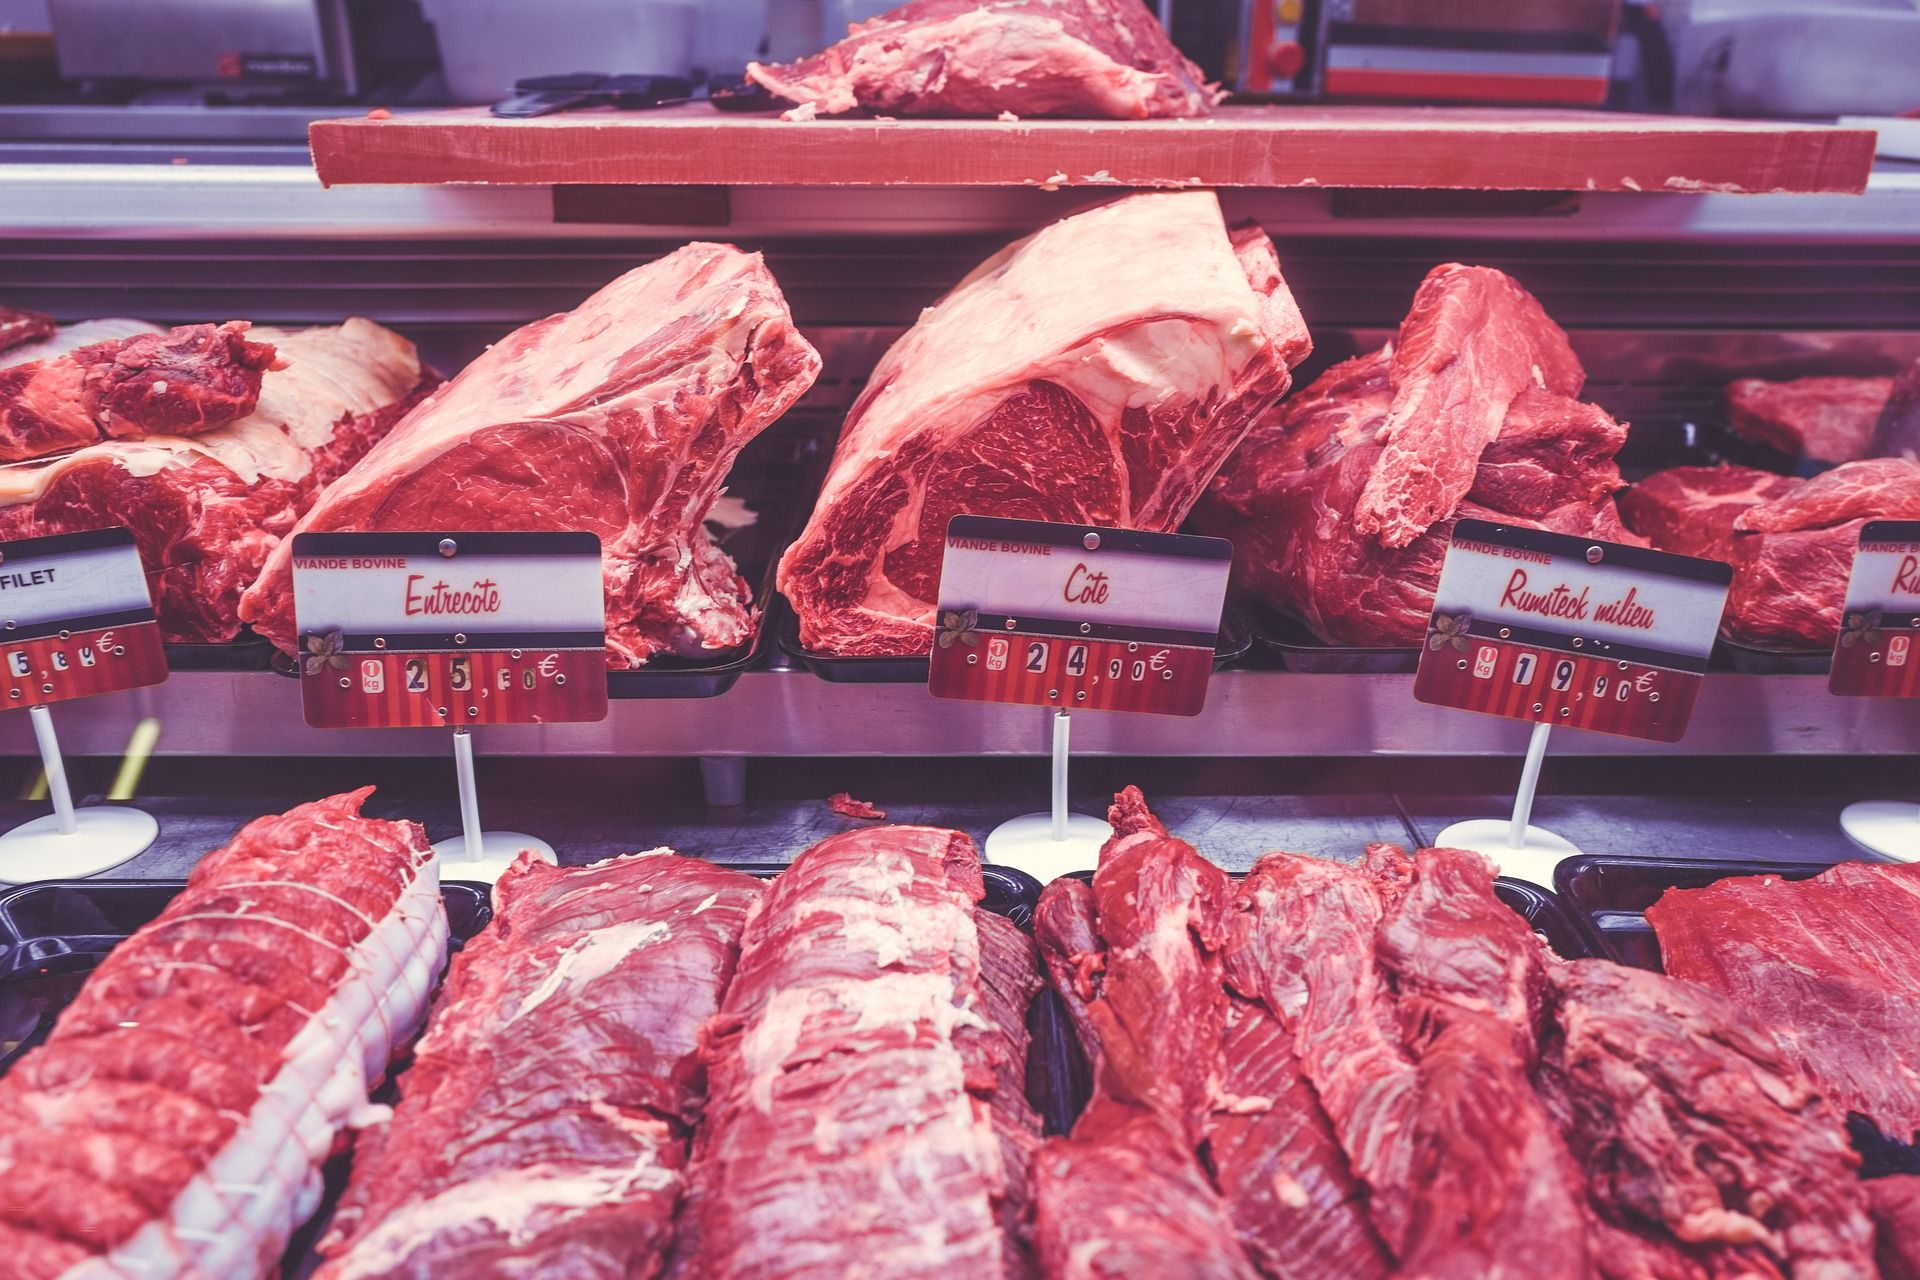 Grocery chains could do more to prevent antibiotic overuse in meat, report says